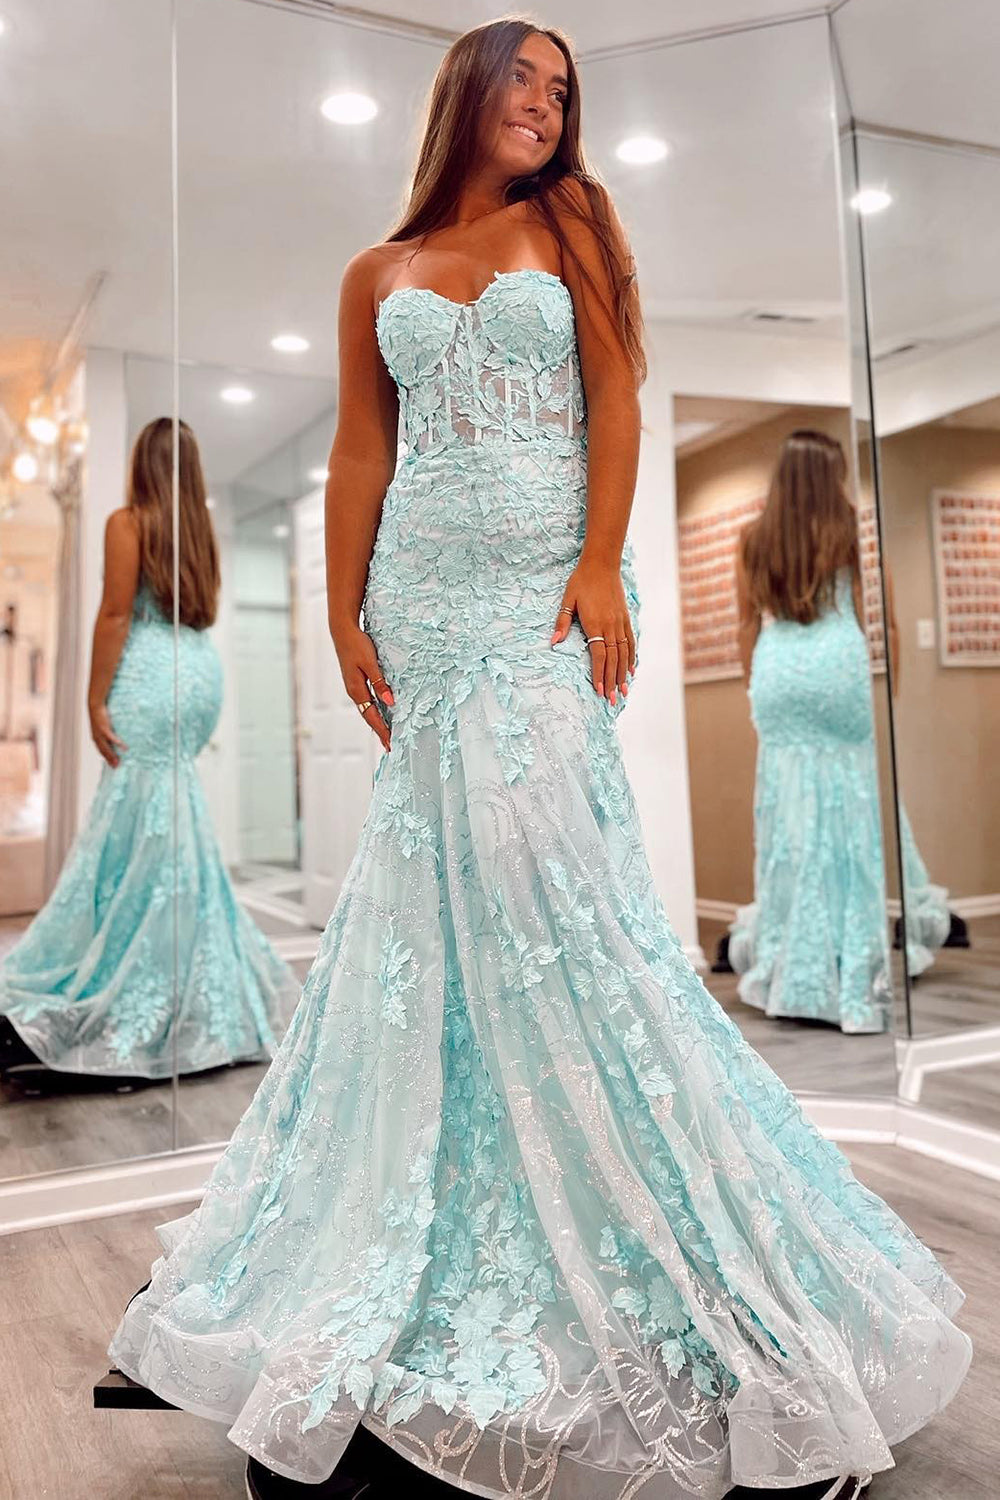 Green Strapless Mermaid Corset Prom Dress with Appliques